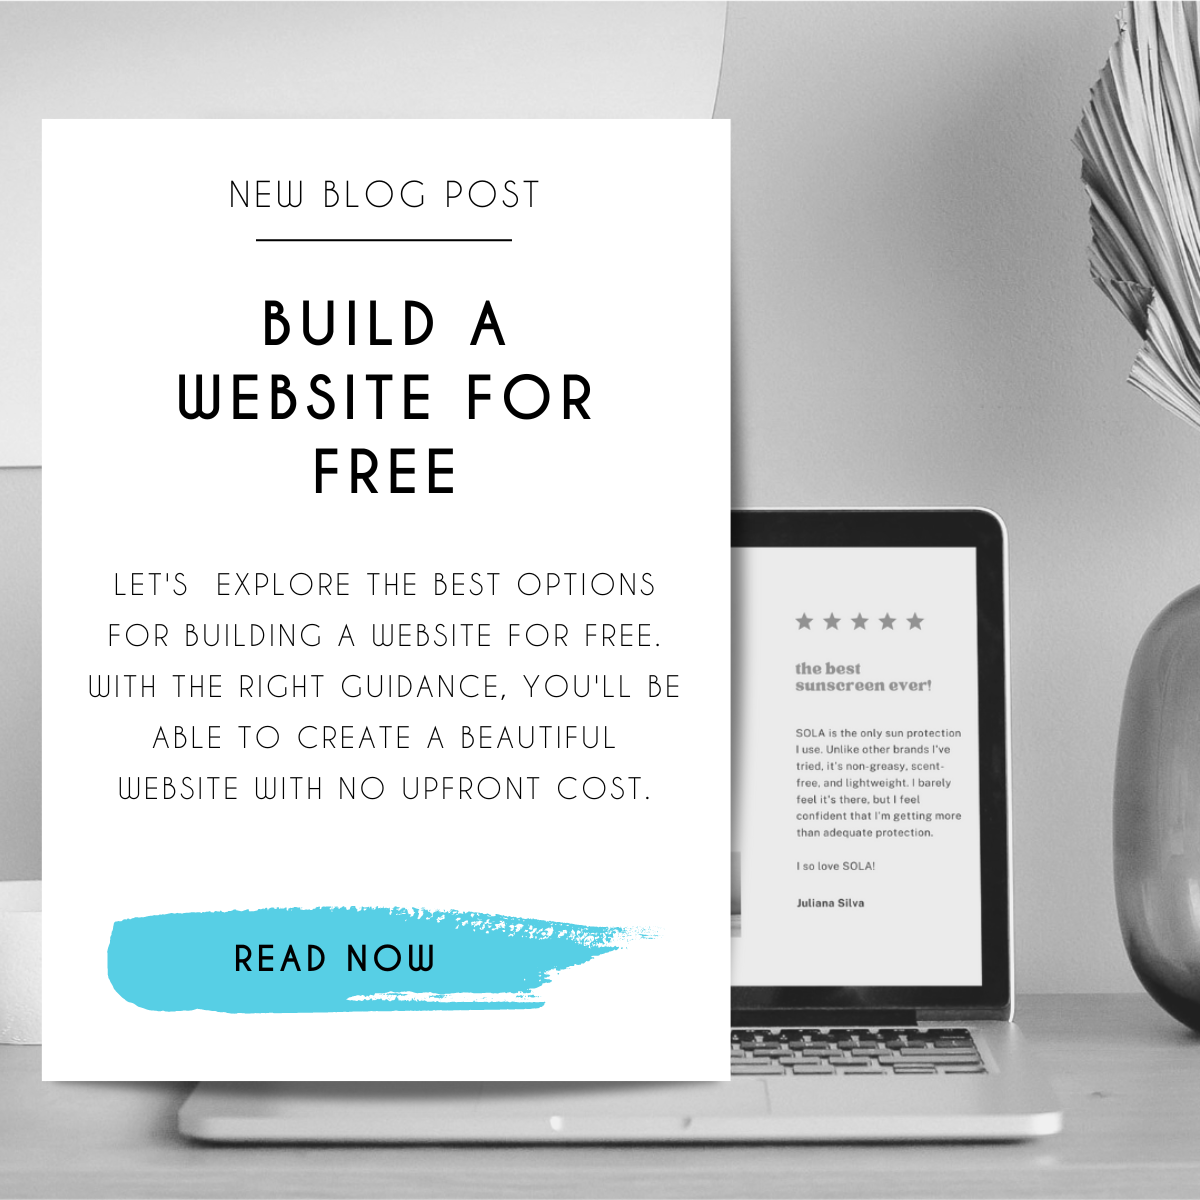 Building a Website for Free: What Are My Options?